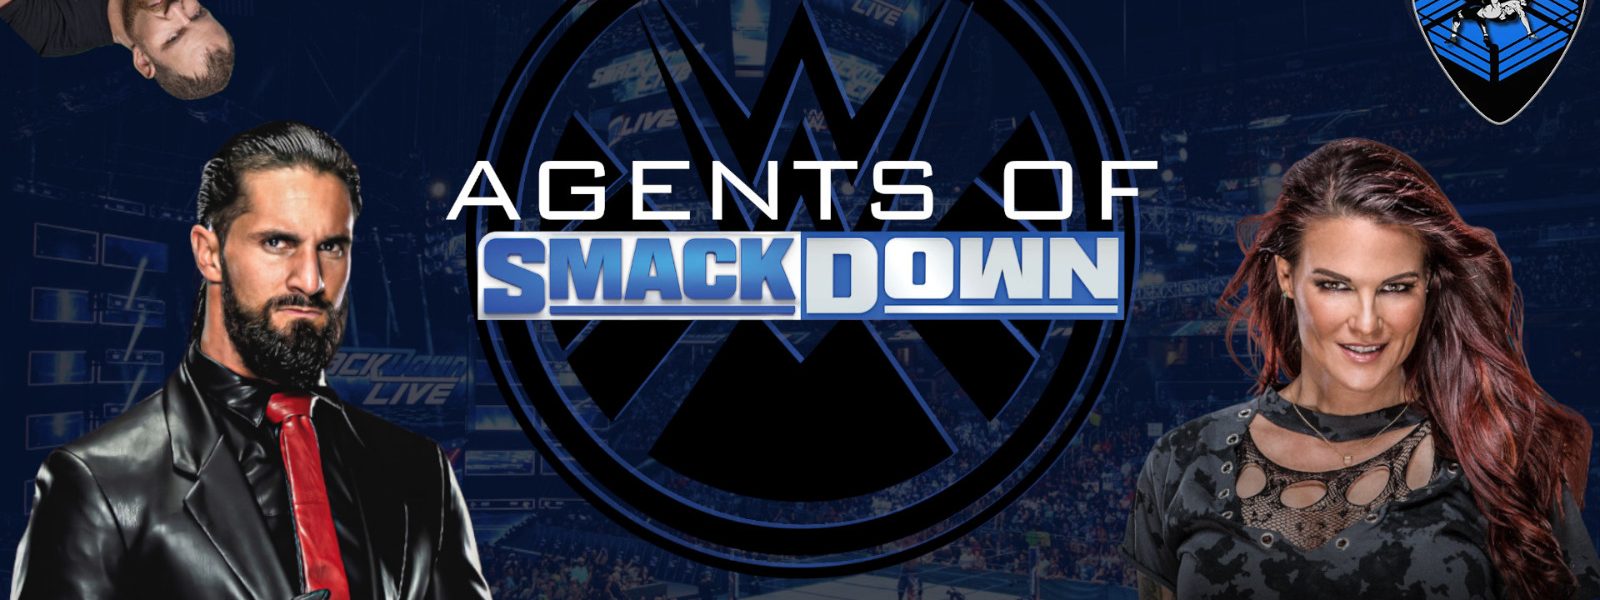 Una puntata paranormale - Agents Of Smackdown EP.37